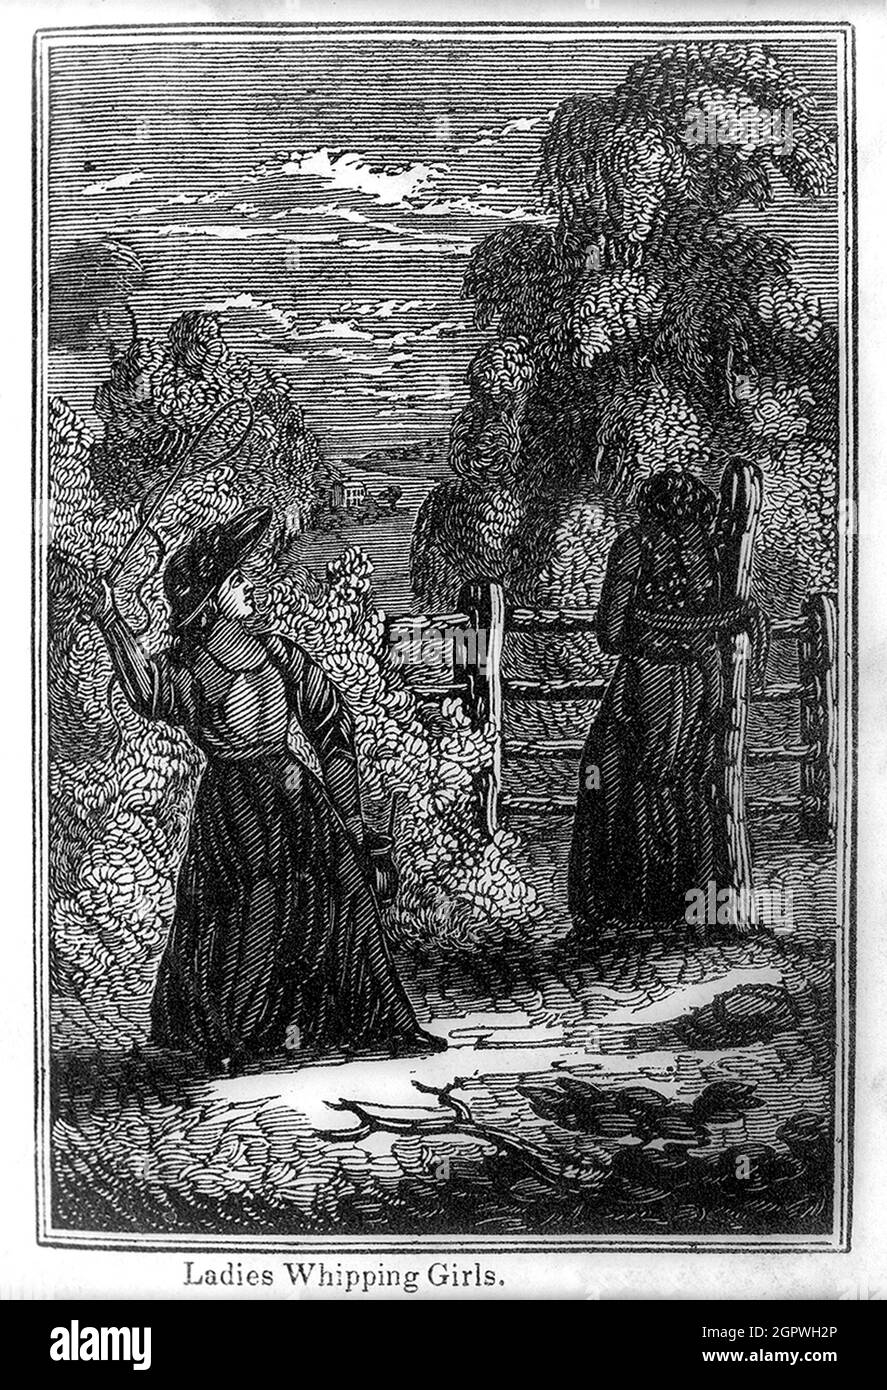 Vintage woodcut print circa 1834 entitled "Ladies whipping girls" showing an African American woman tied to a tree and being whipped by a white woman from the book Picture of slavery in the United States of America Stock Photo